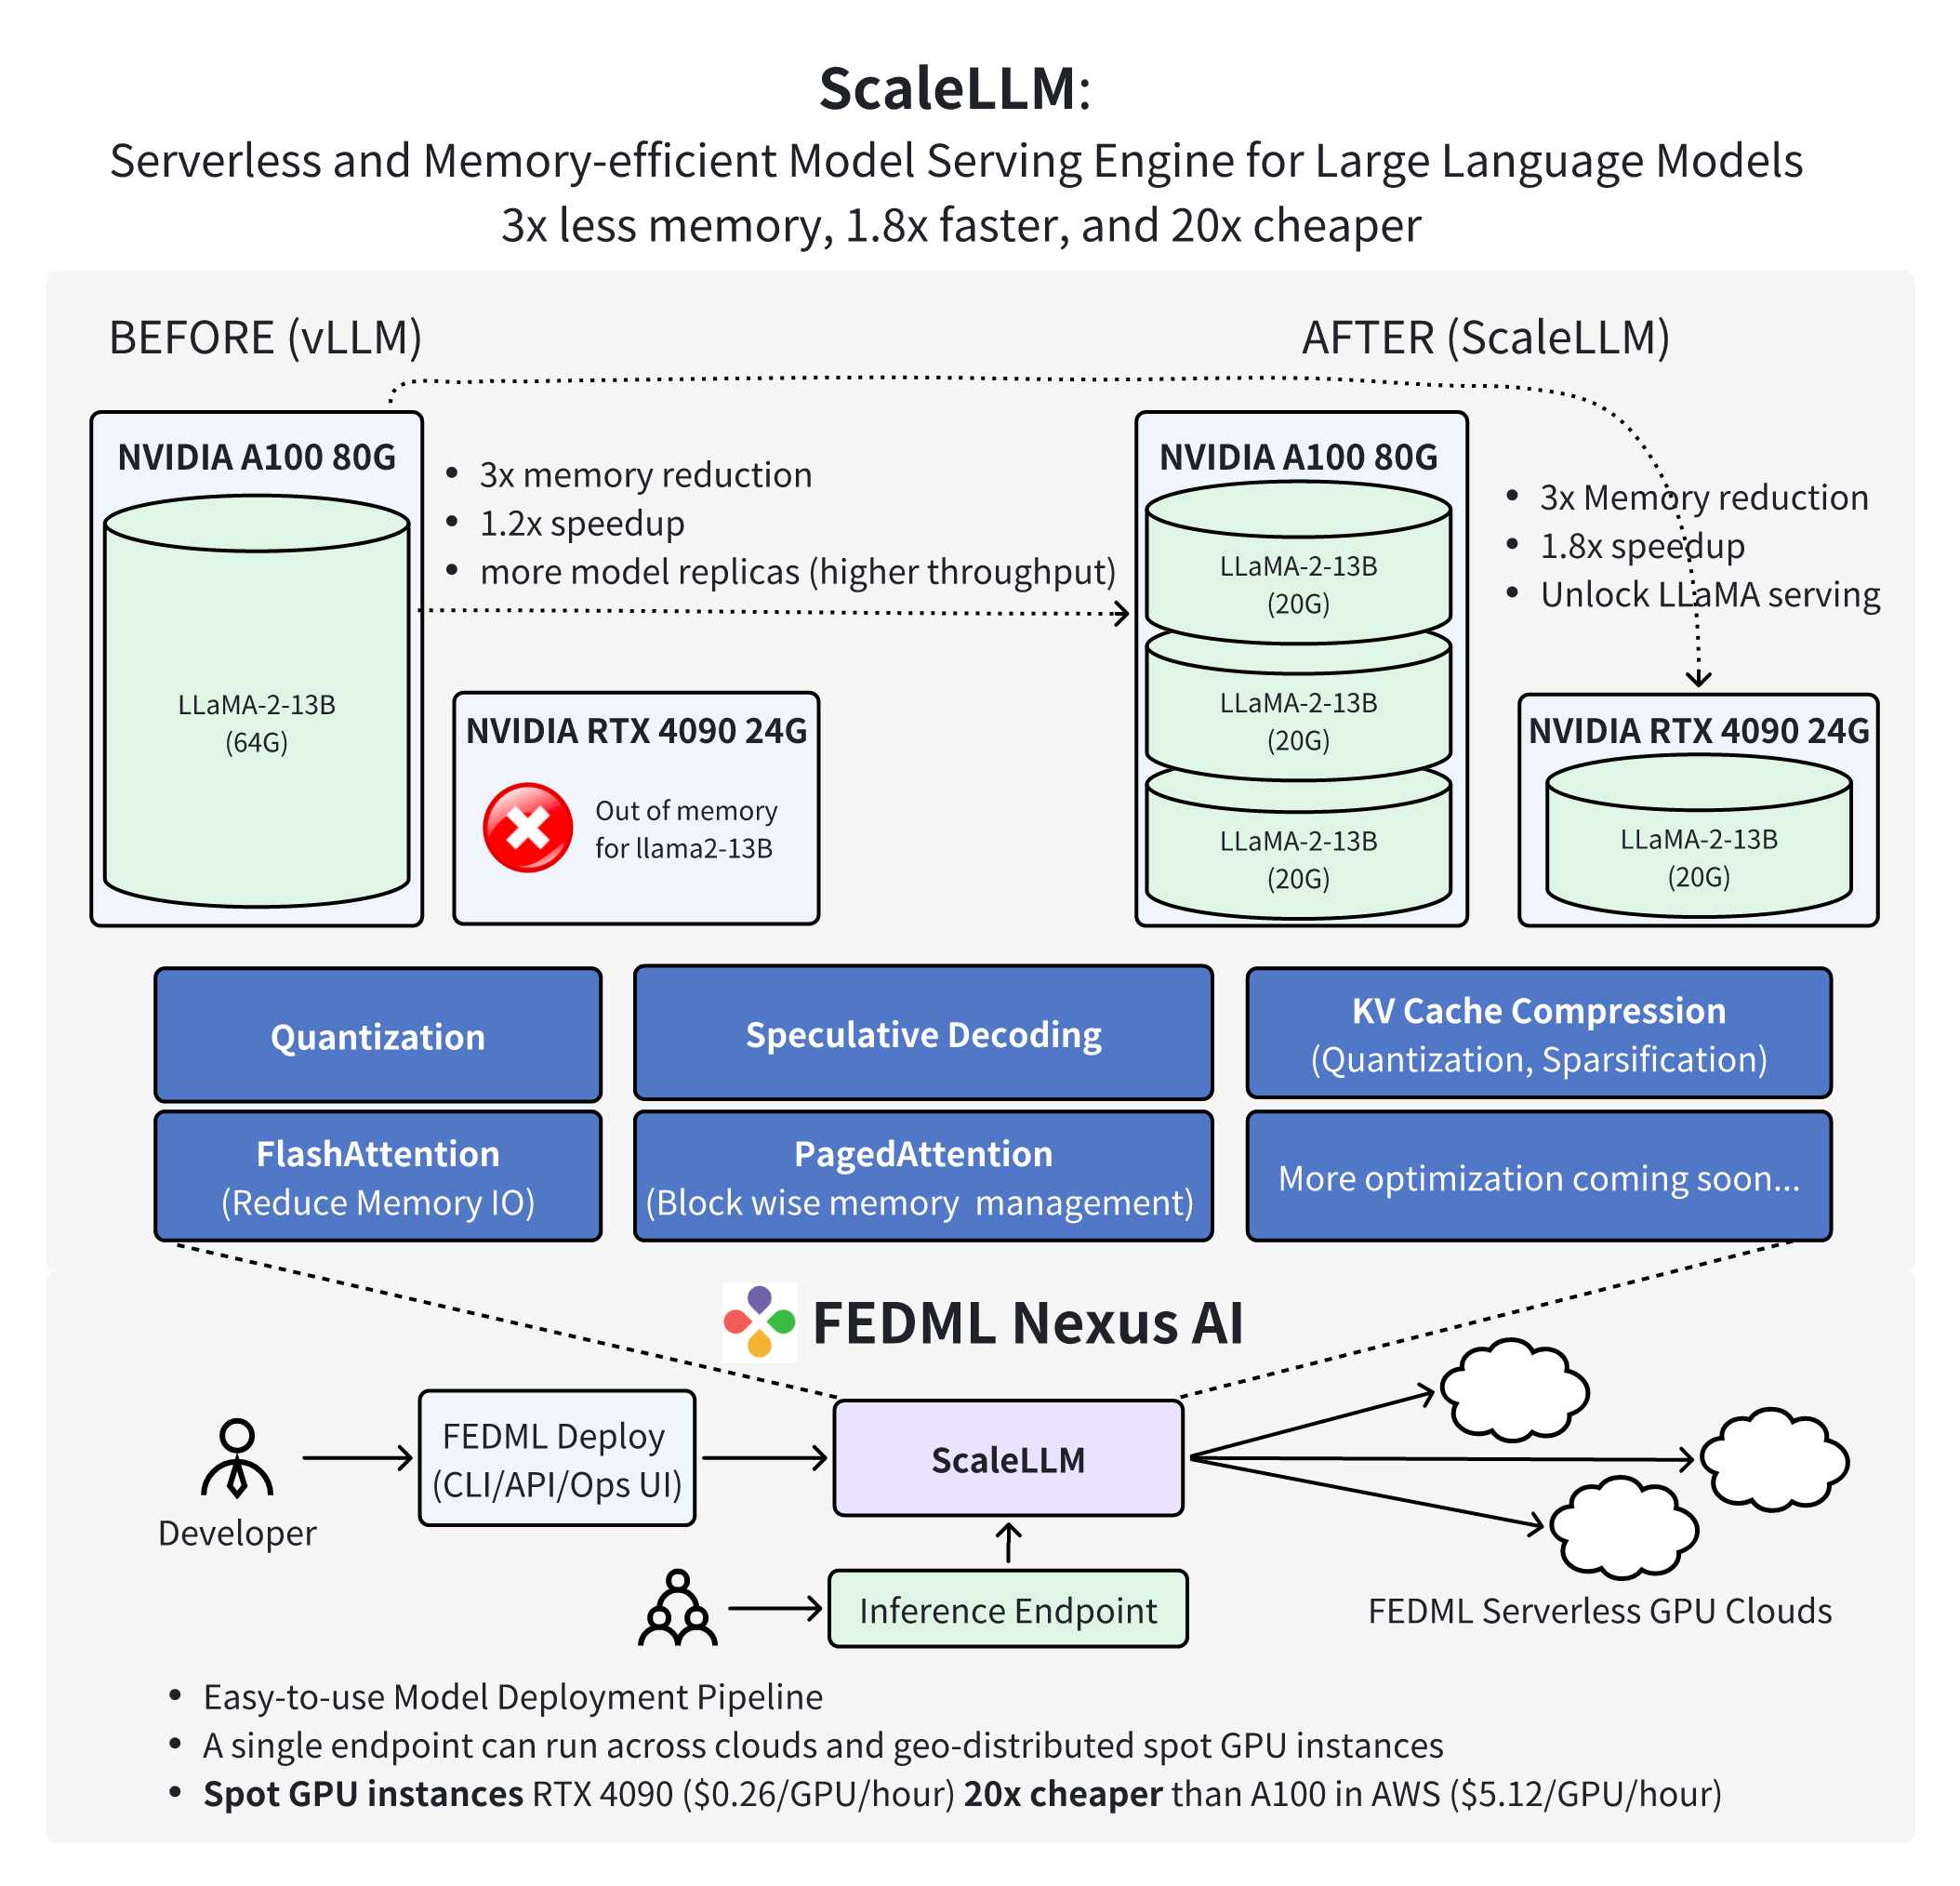 Scalable Model Deployment and Serving on FEDML Nexus AI